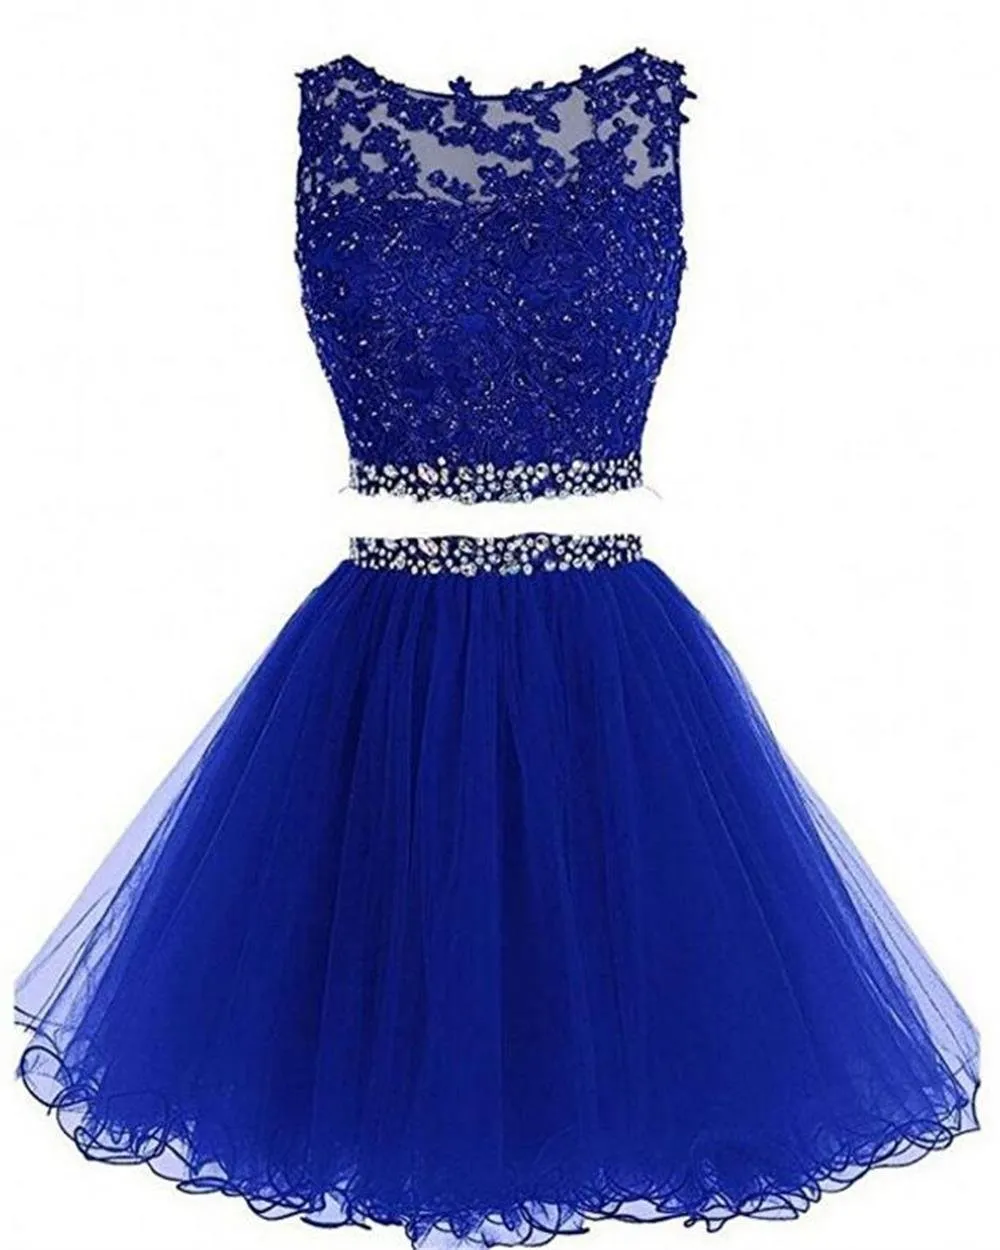 2019 Two Pieces Short Mini Homecoming Dresses Beading Key Hold Back A Line Prom Dresses Plus Size Summer Wear Dreses